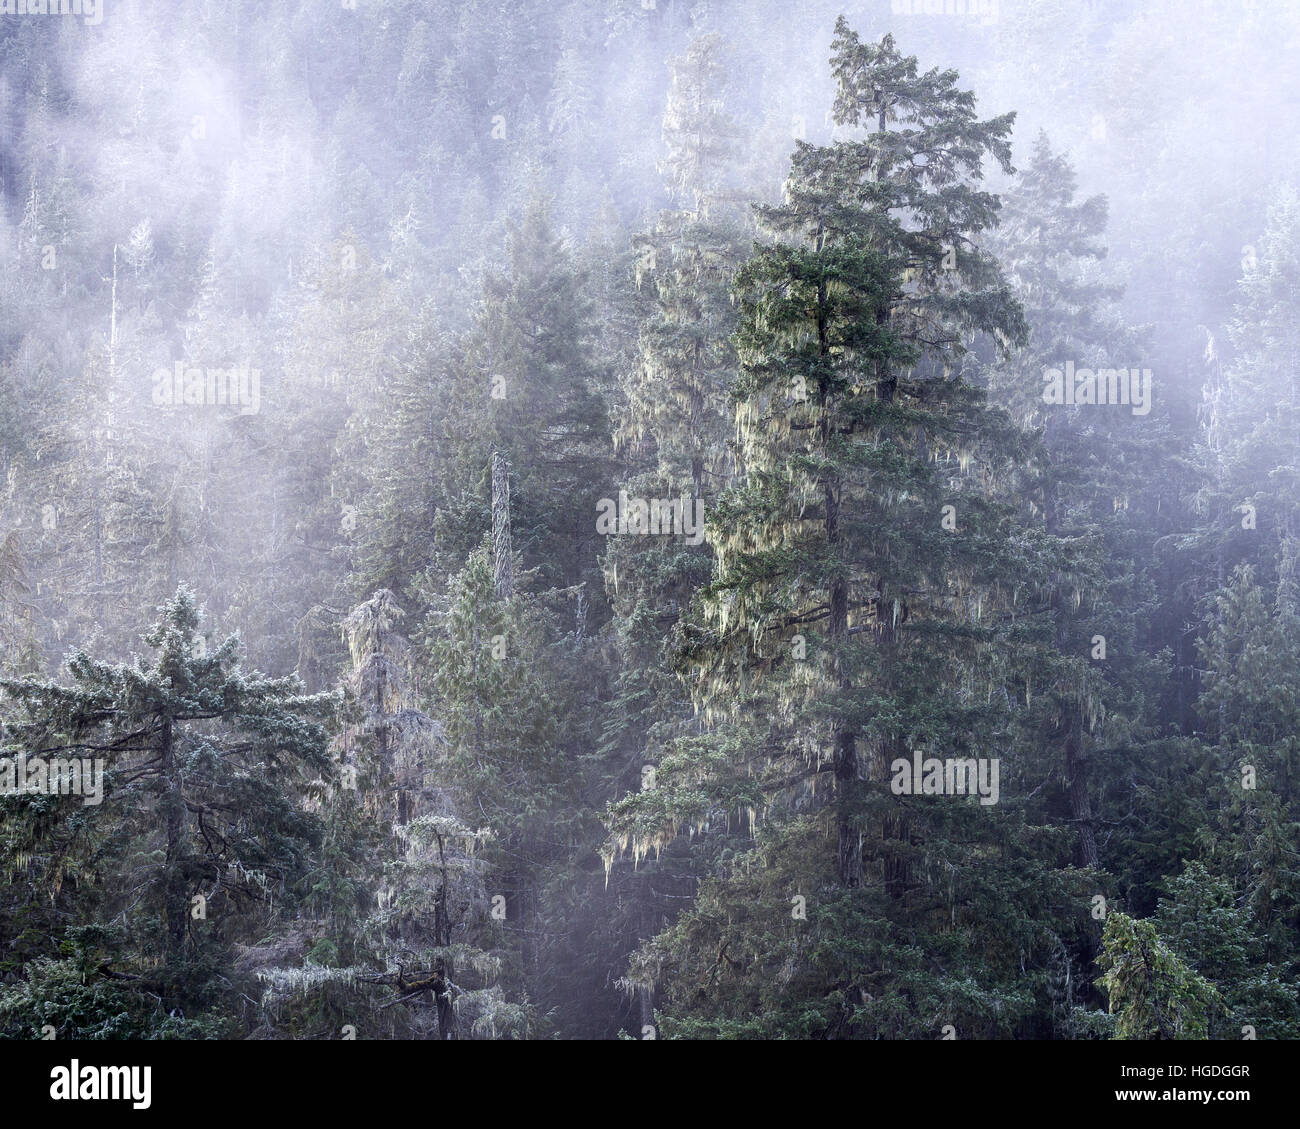 WA14009-00...WASHINGTON - Trees in fog along the Dosewallips River Valley in the Olympic National Forest. Stock Photo